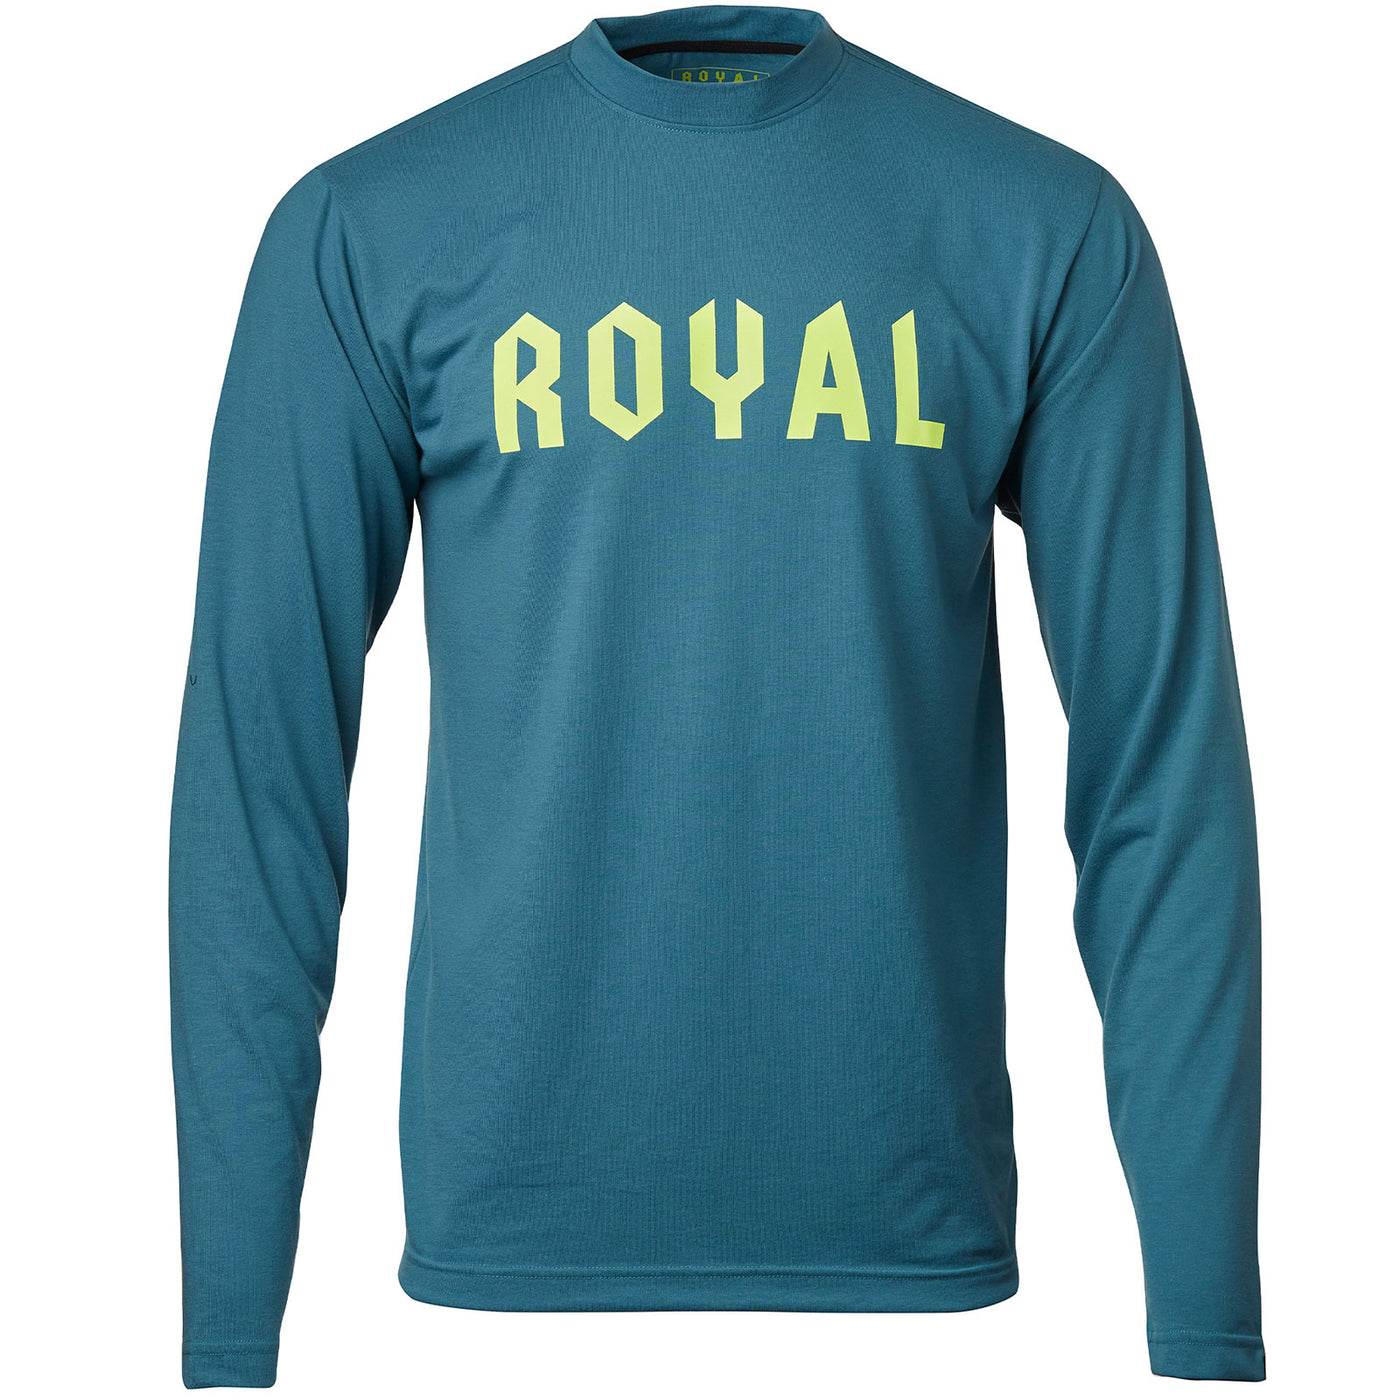 Royal Racing Core Jersey LS - Corp Steel Blue Heather